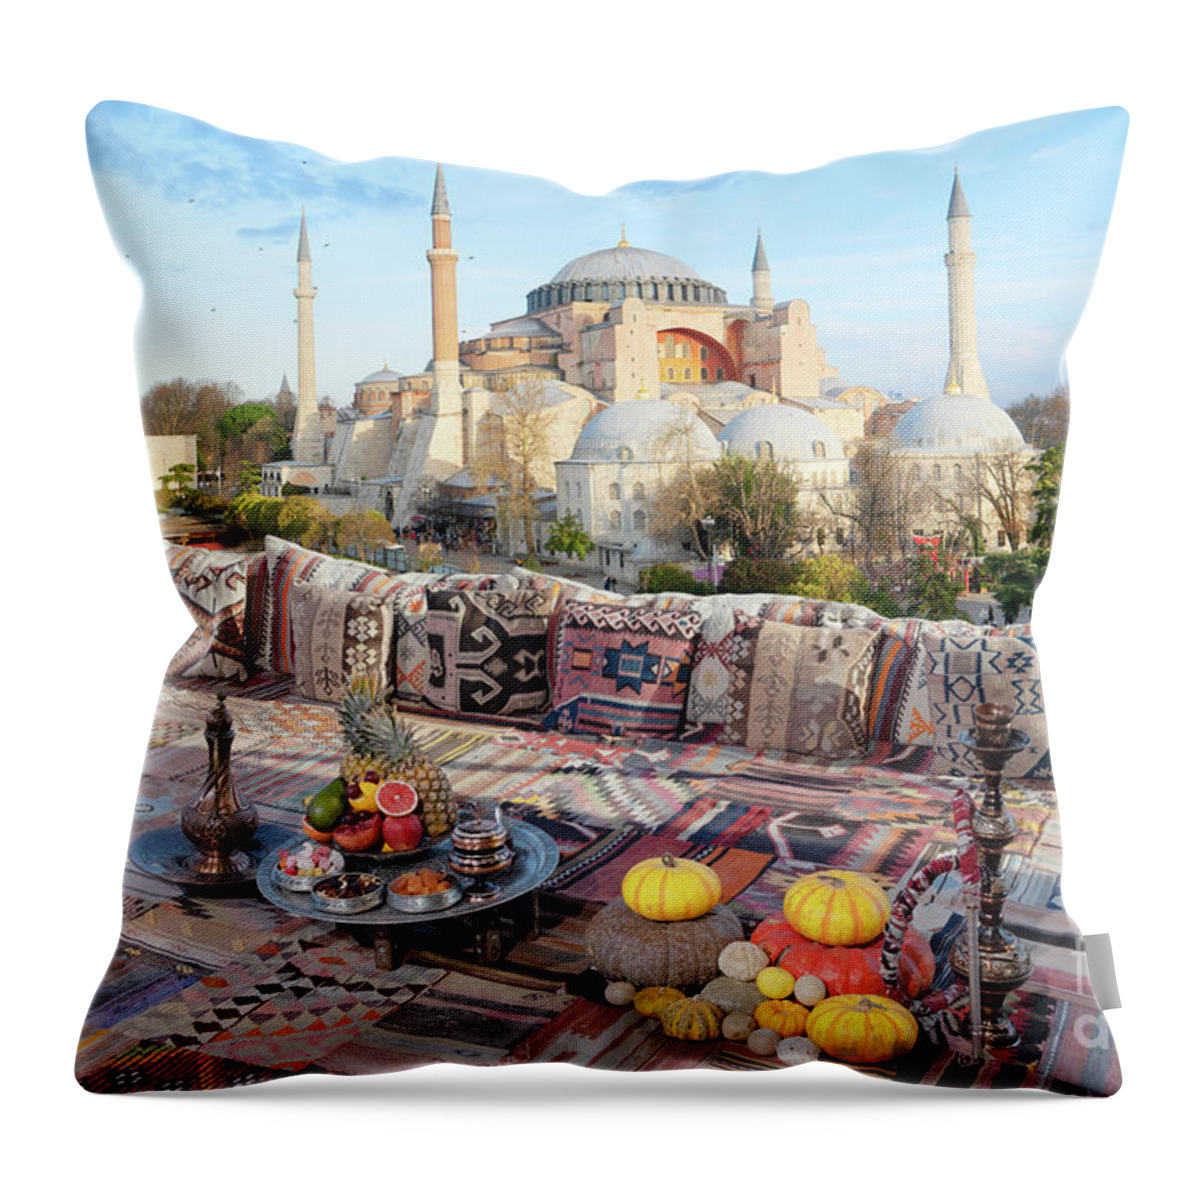 Hagia Sophia Throw Pillow featuring the photograph Hagia Sophia cathedral by Anastasy Yarmolovich